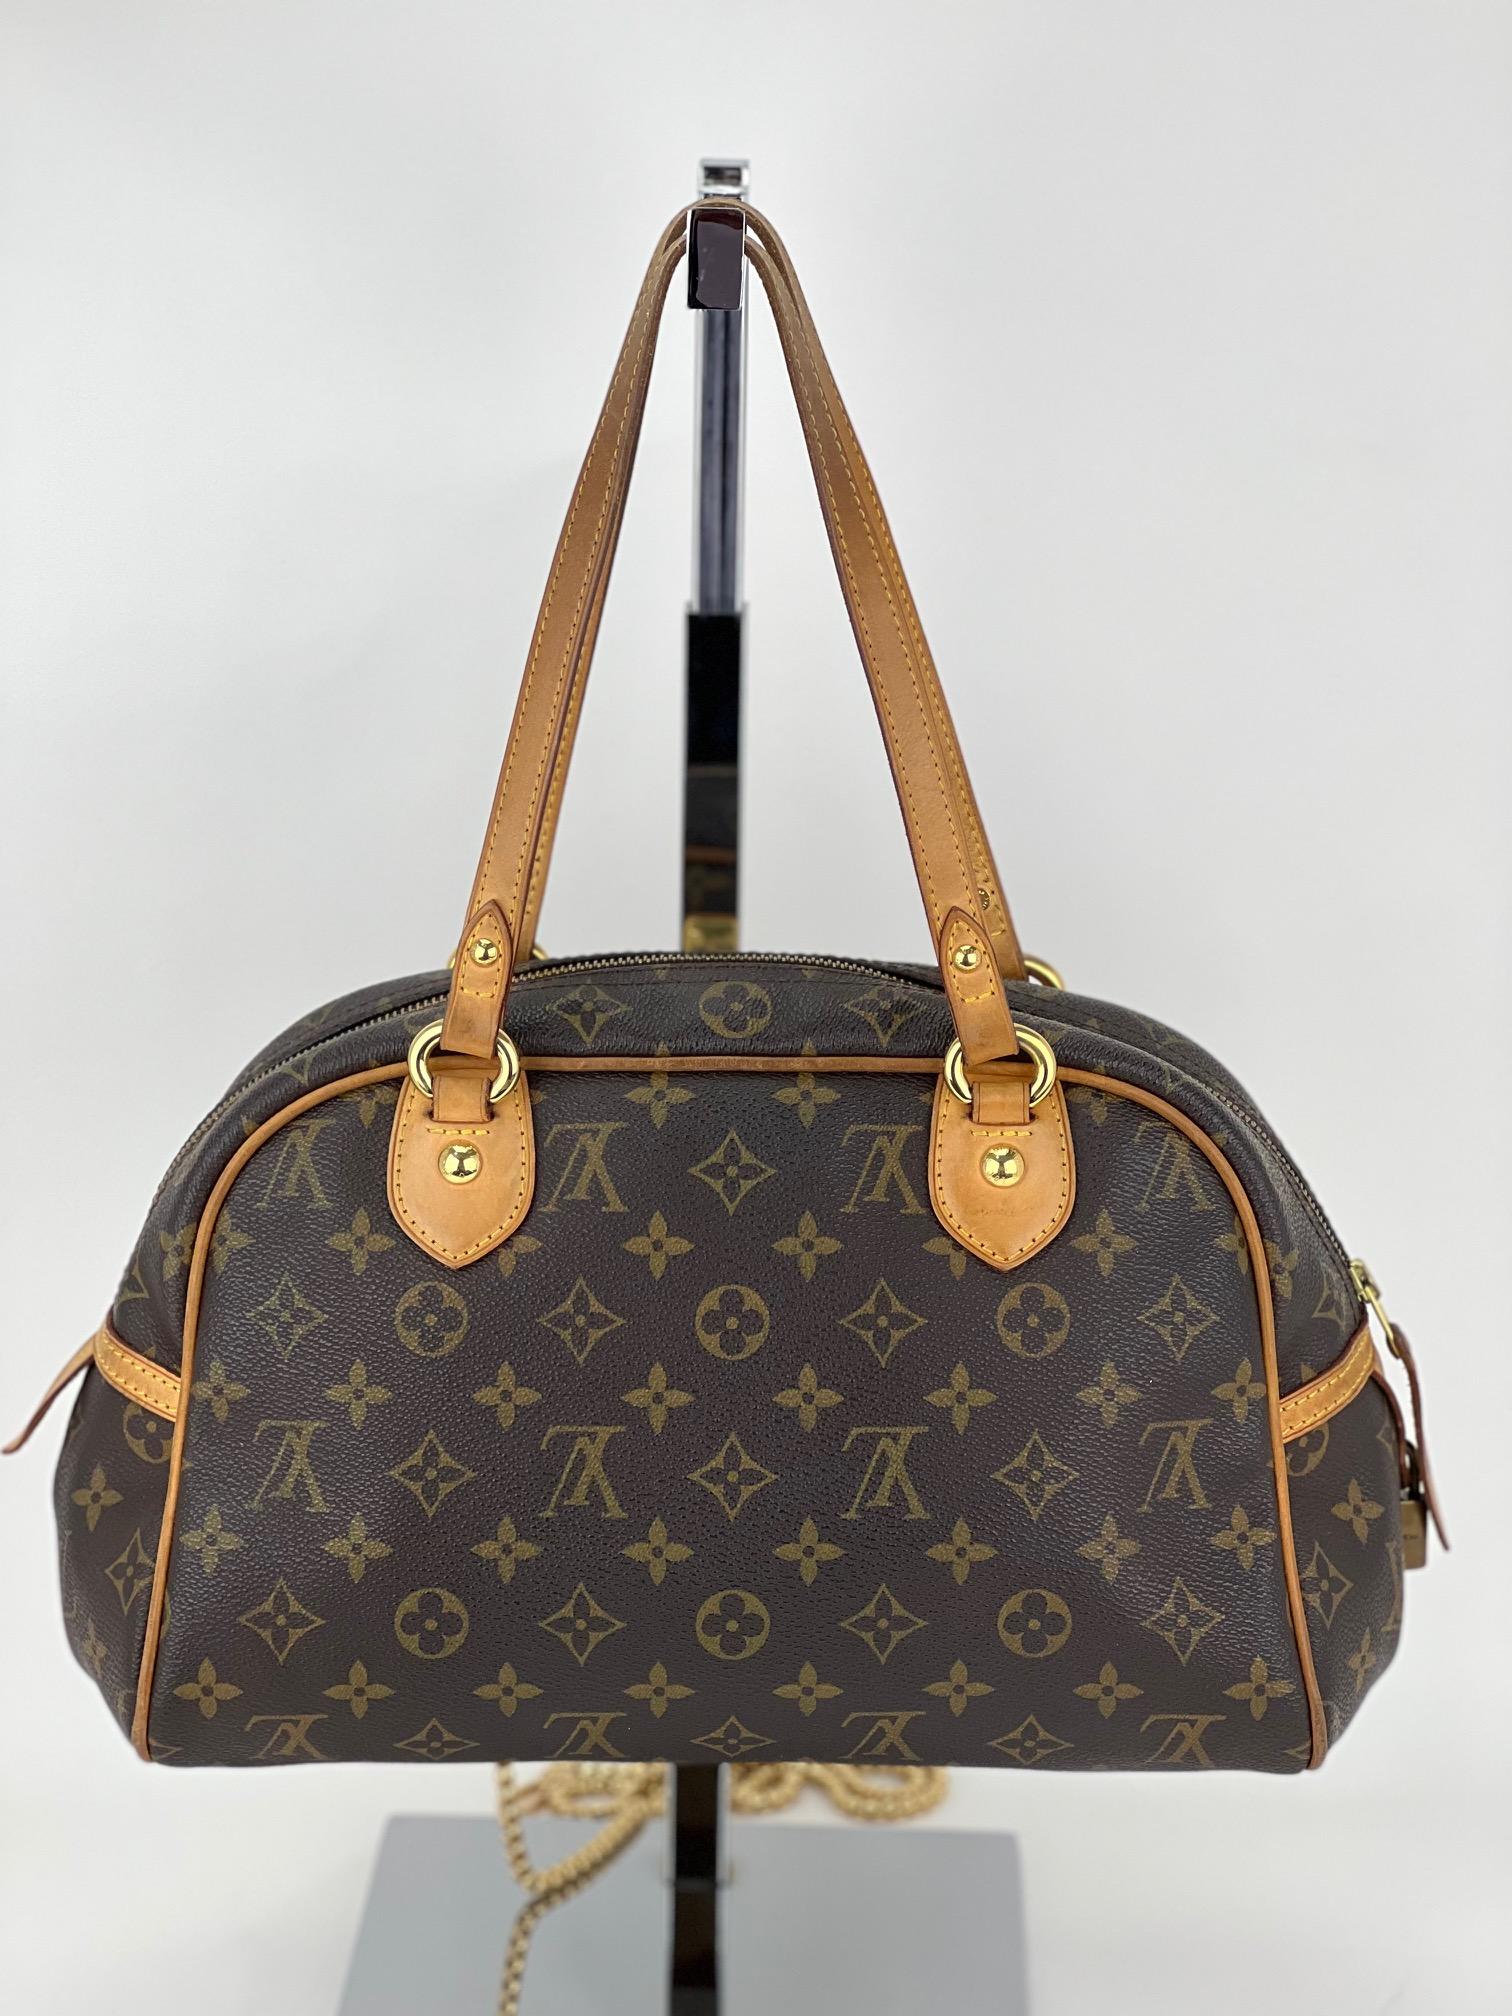 100% Authentic Pre owned
LOUIS VUITTON Monogram Canvas Montorgueil PM Bag
W/added Non LV Strap to carry as a Shoulder Bag
RATING: B/C... Good,, shows some signs of wear and use
LEATHER TRIM:  has some marks and stains
HANDLE: double leather, shows